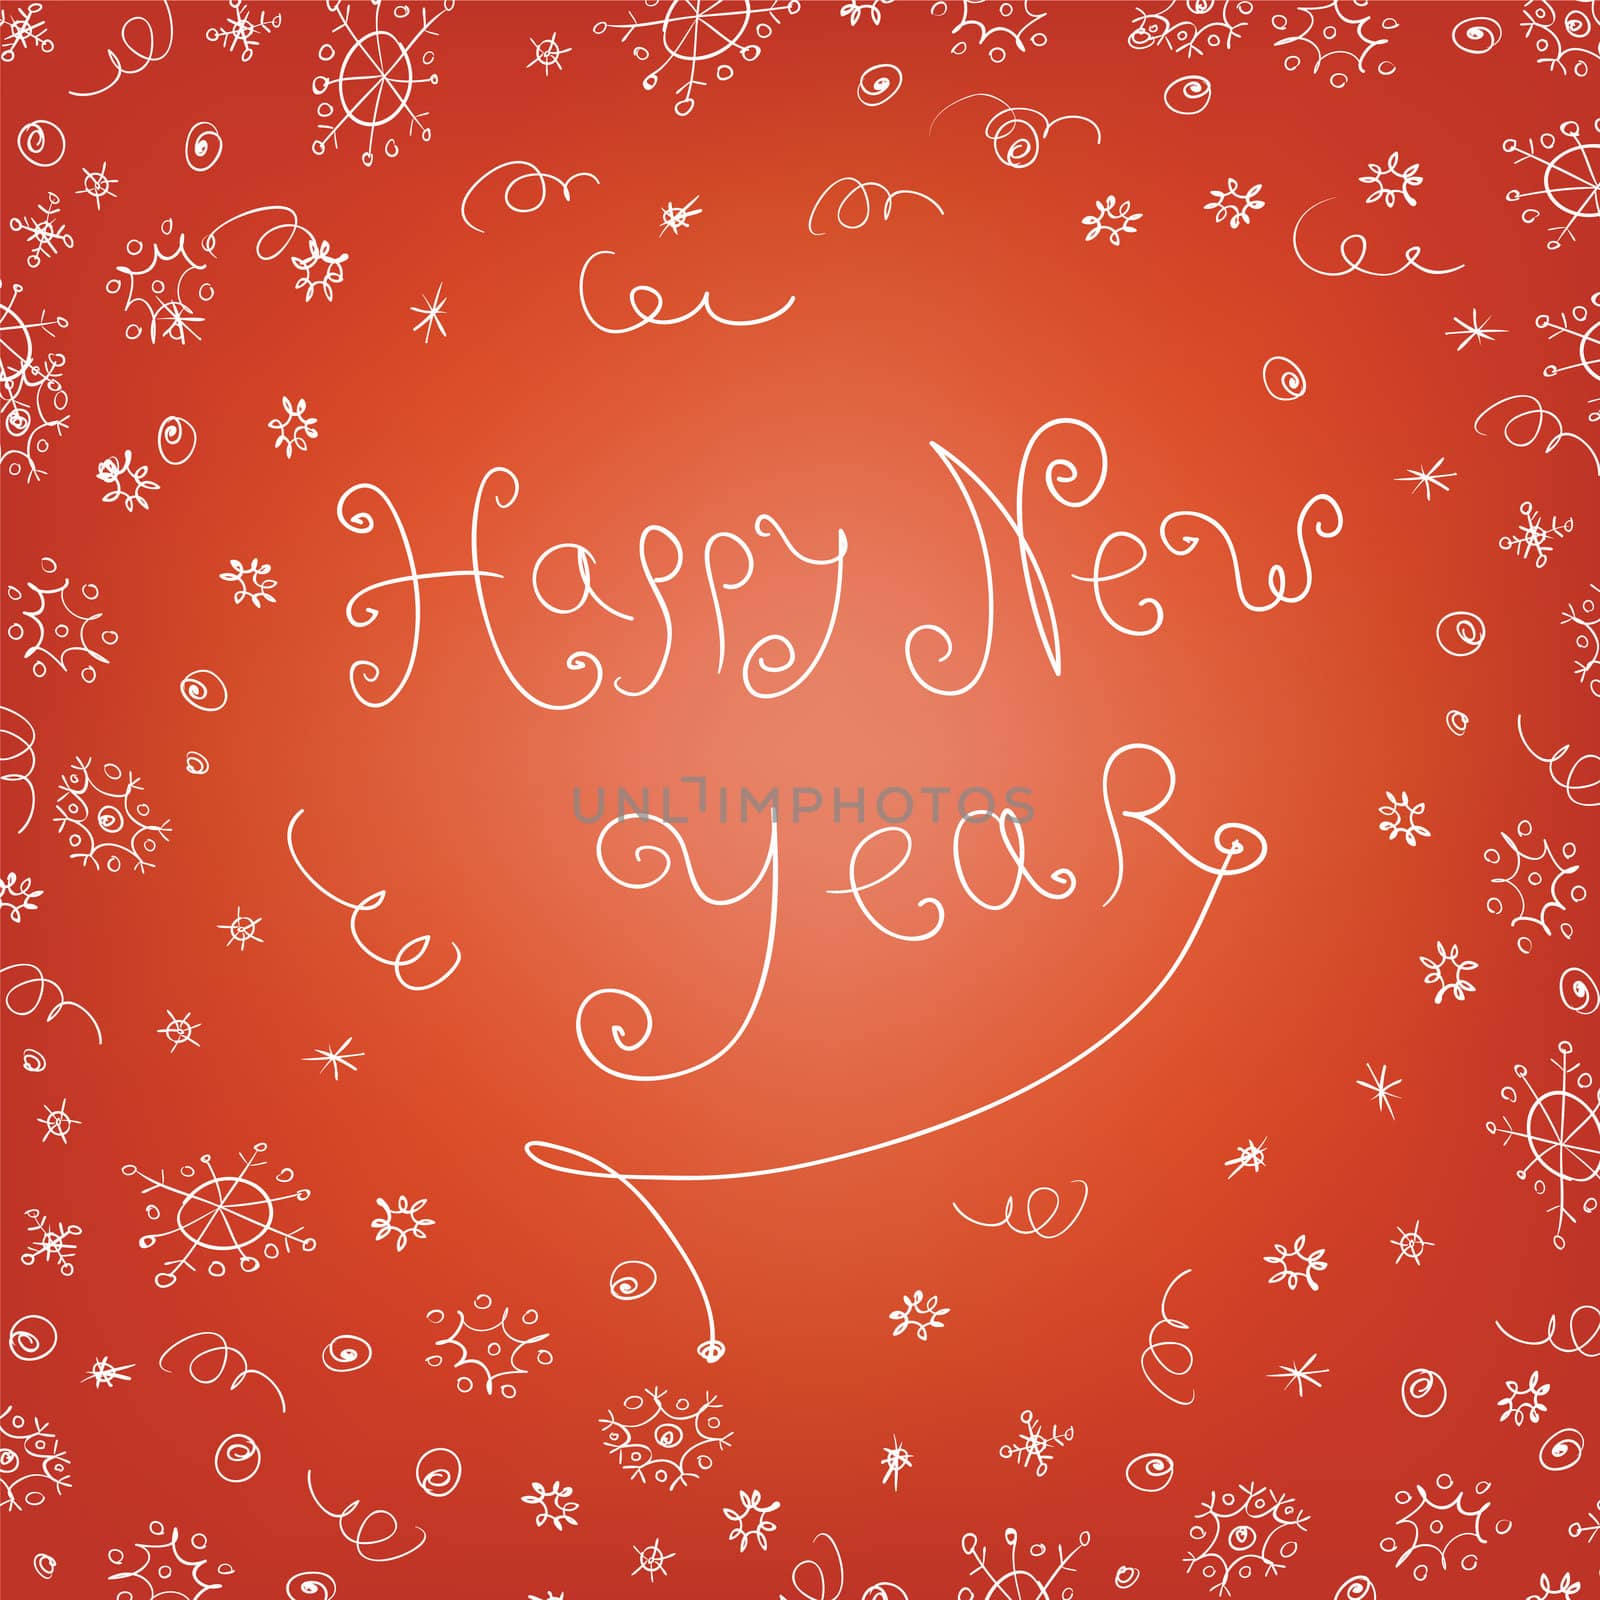 Handwritten quirky new year background by pashabo